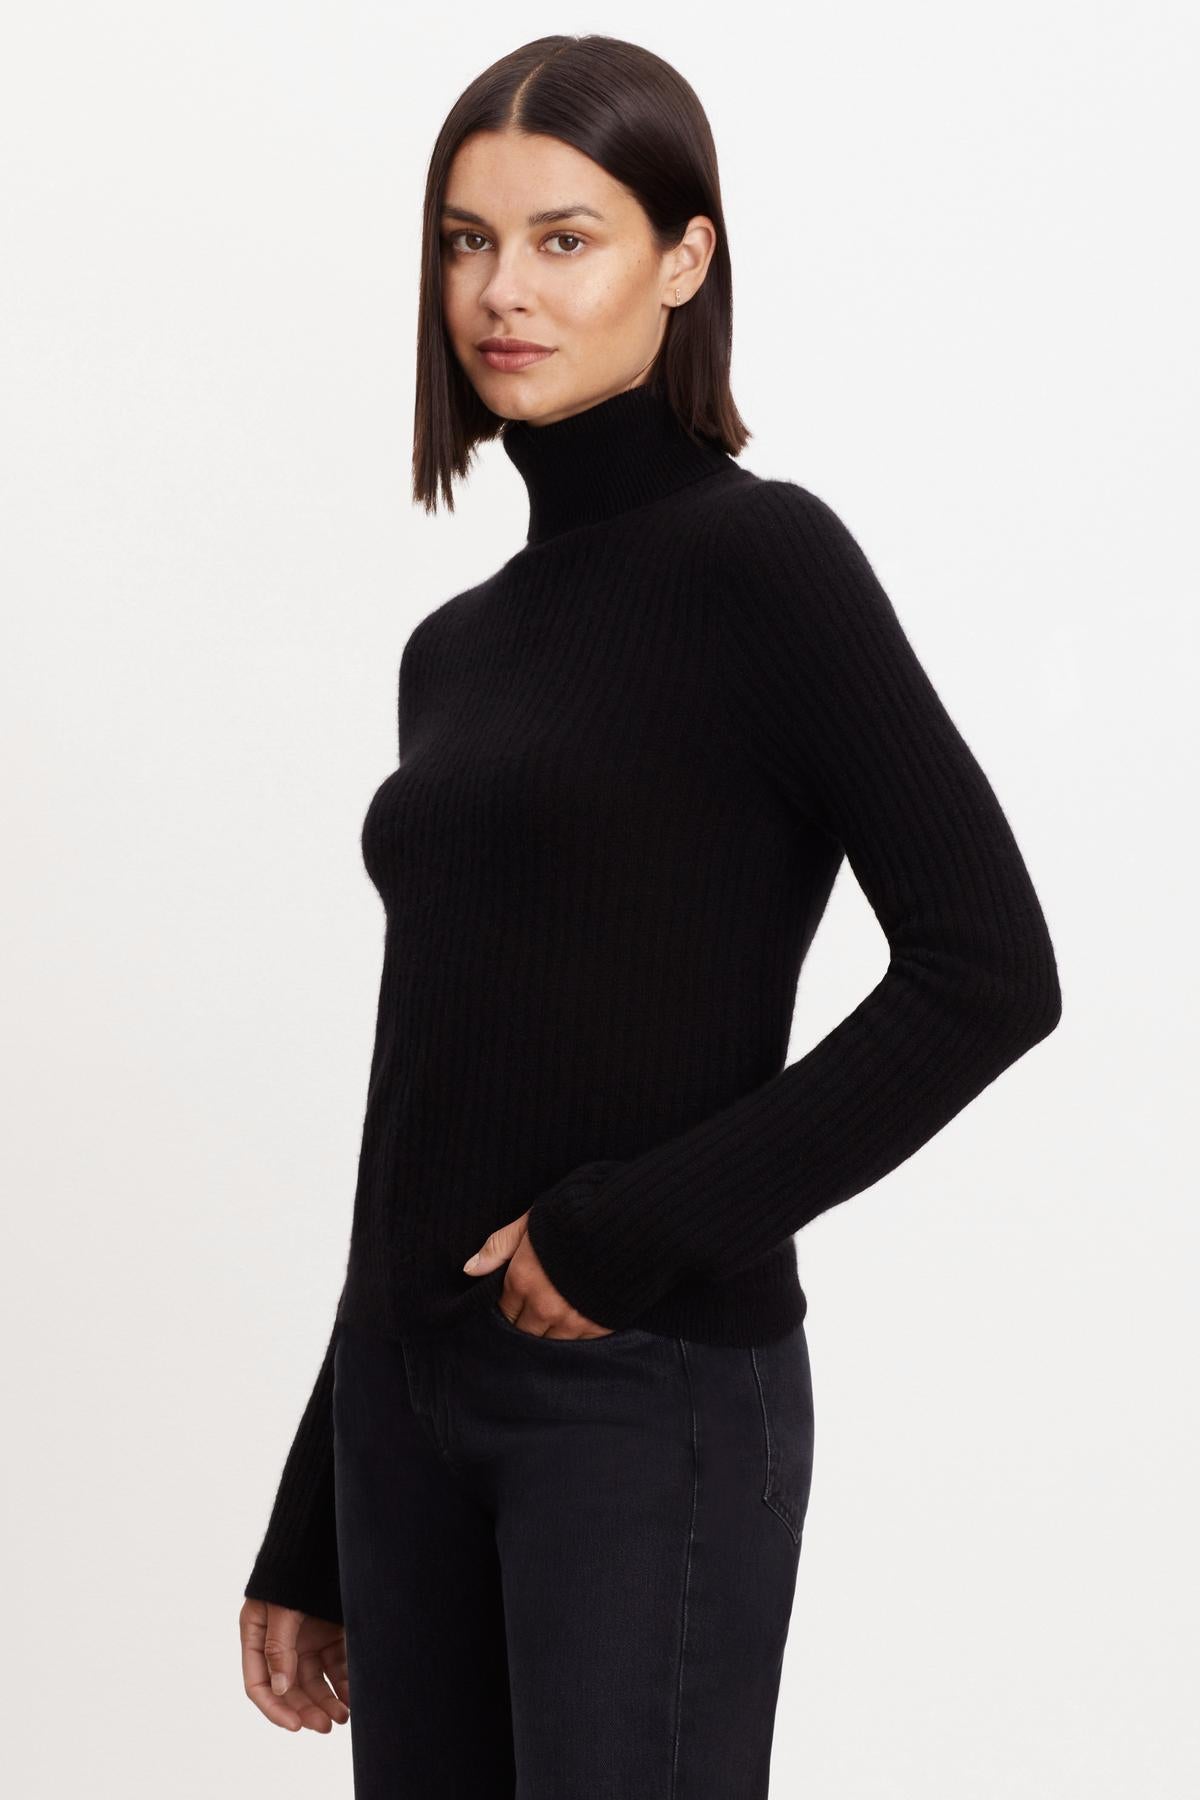 A model wearing a Velvet by Graham & Spencer LORI CASHMERE TURTLENECK SWEATER.-35696186622145